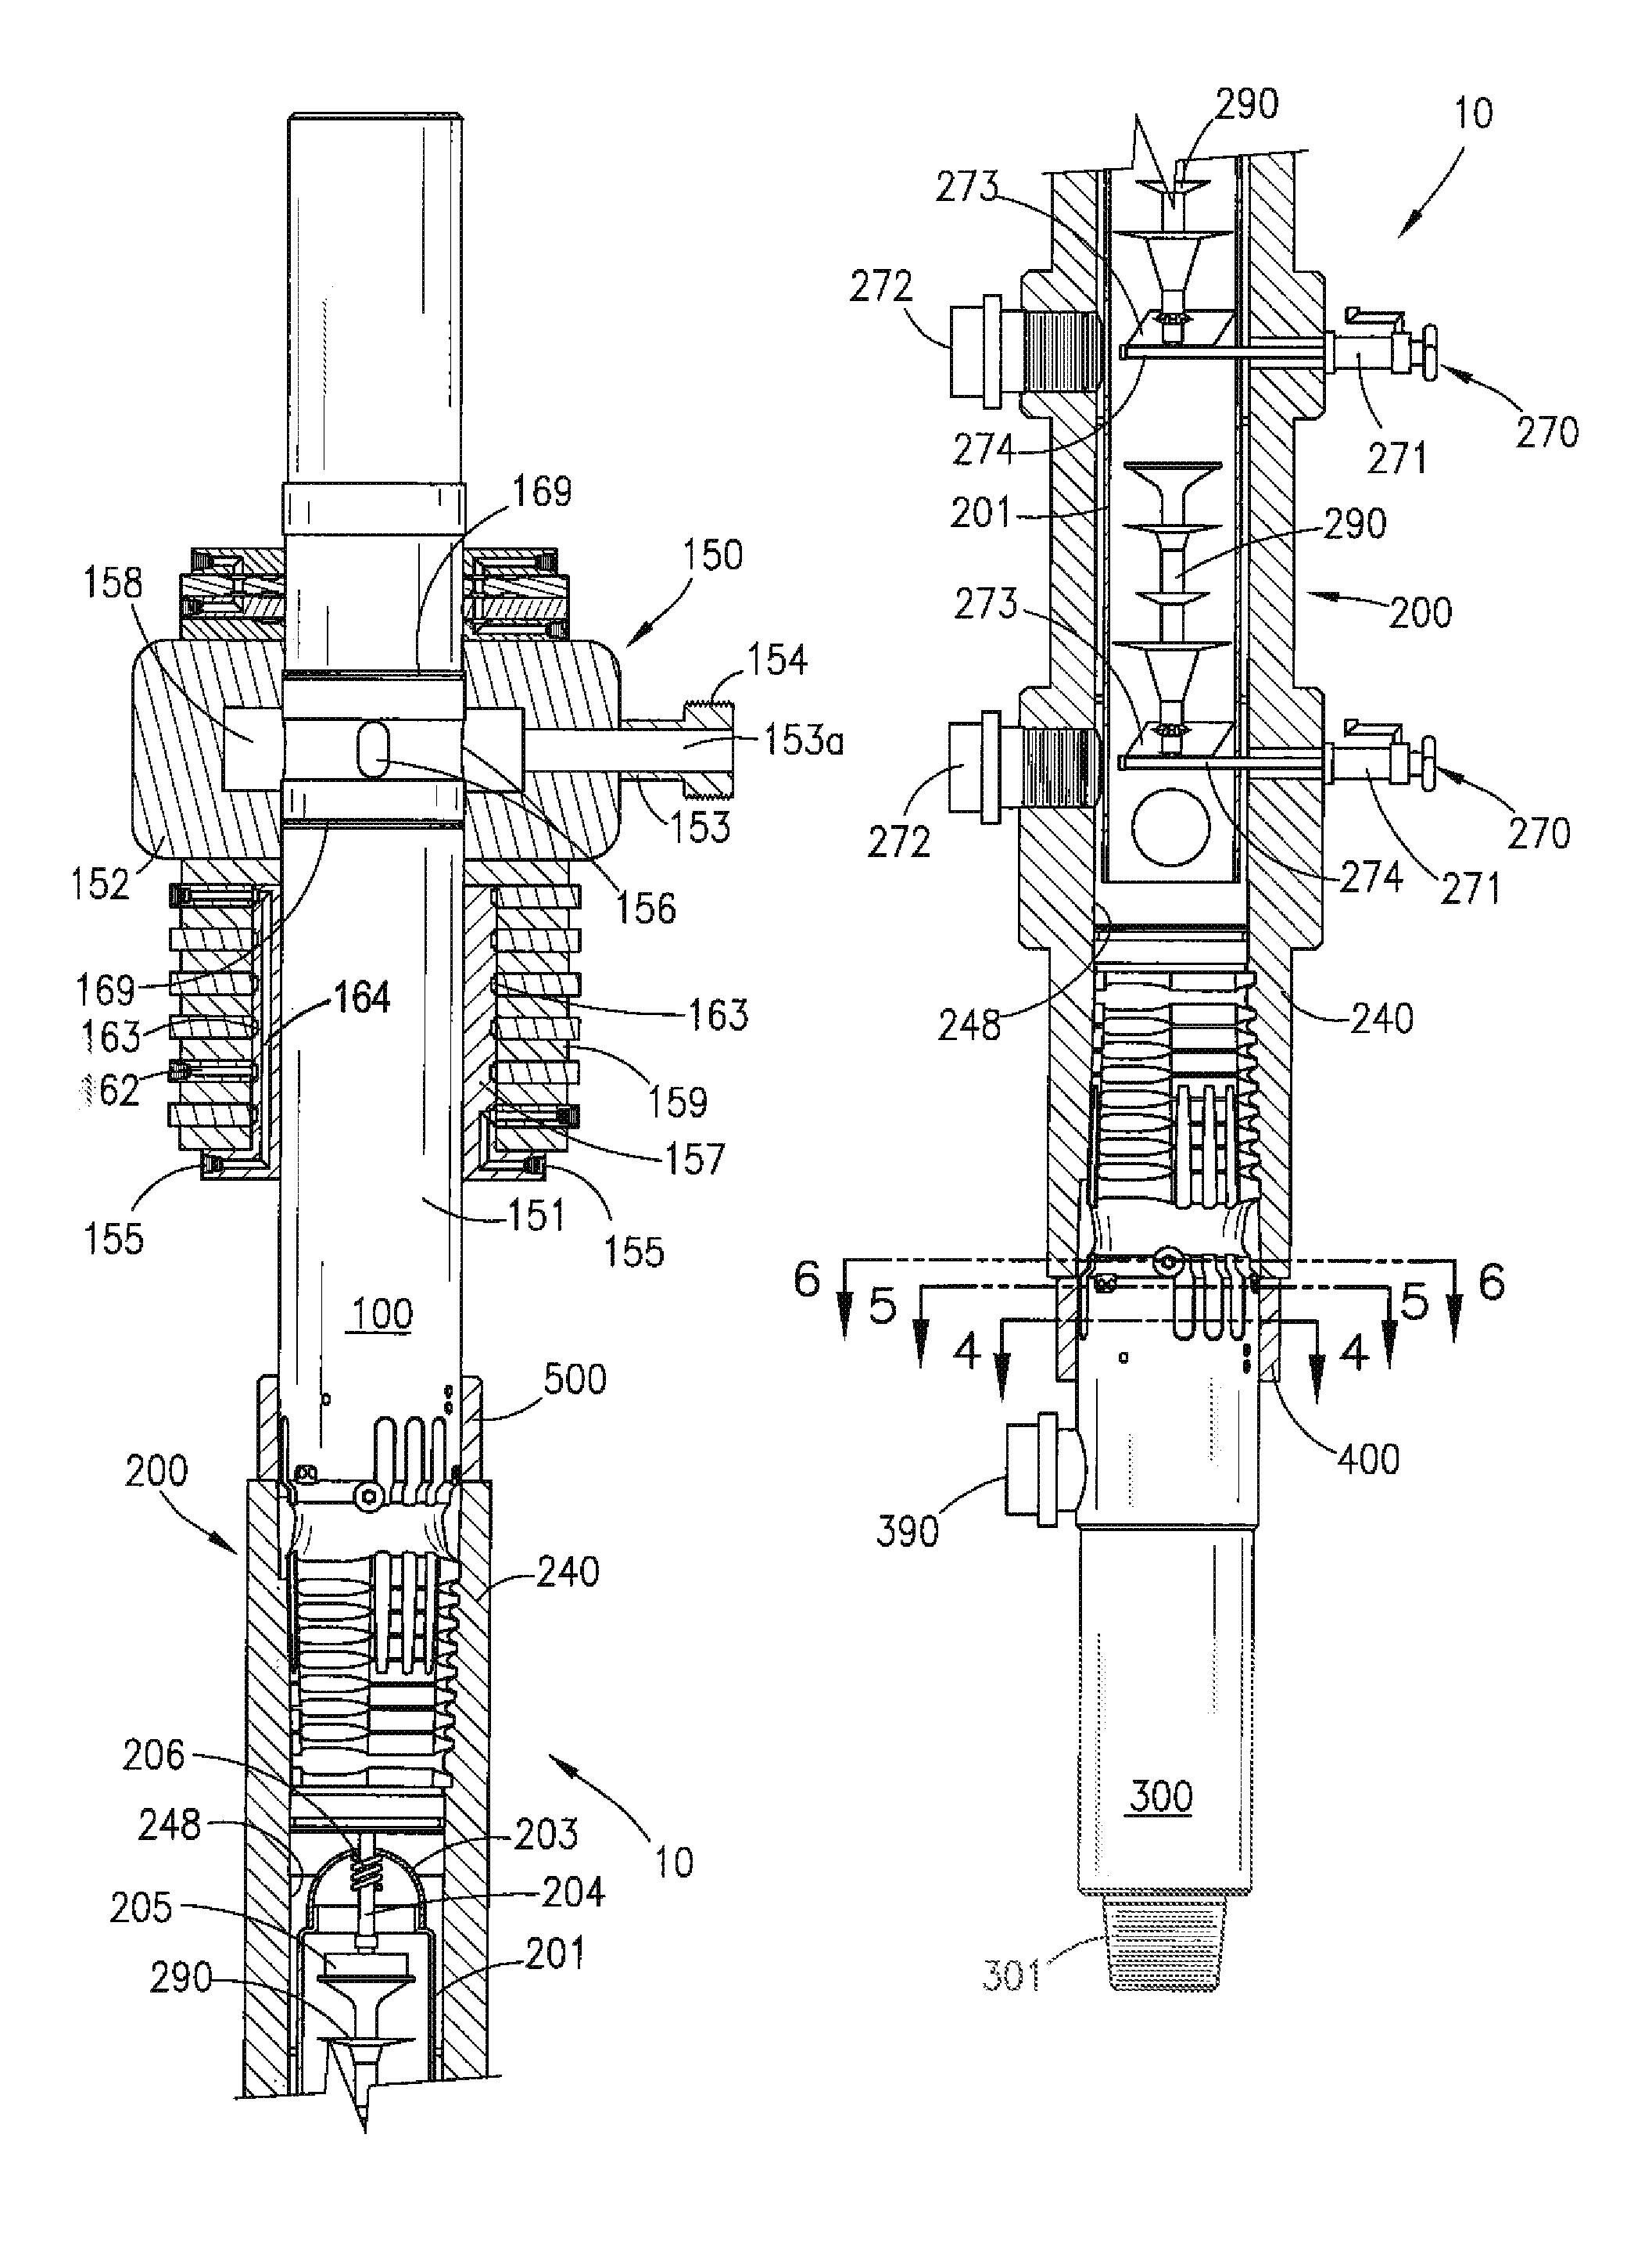 Method and apparatus for performing cementing operations on top drive rigs